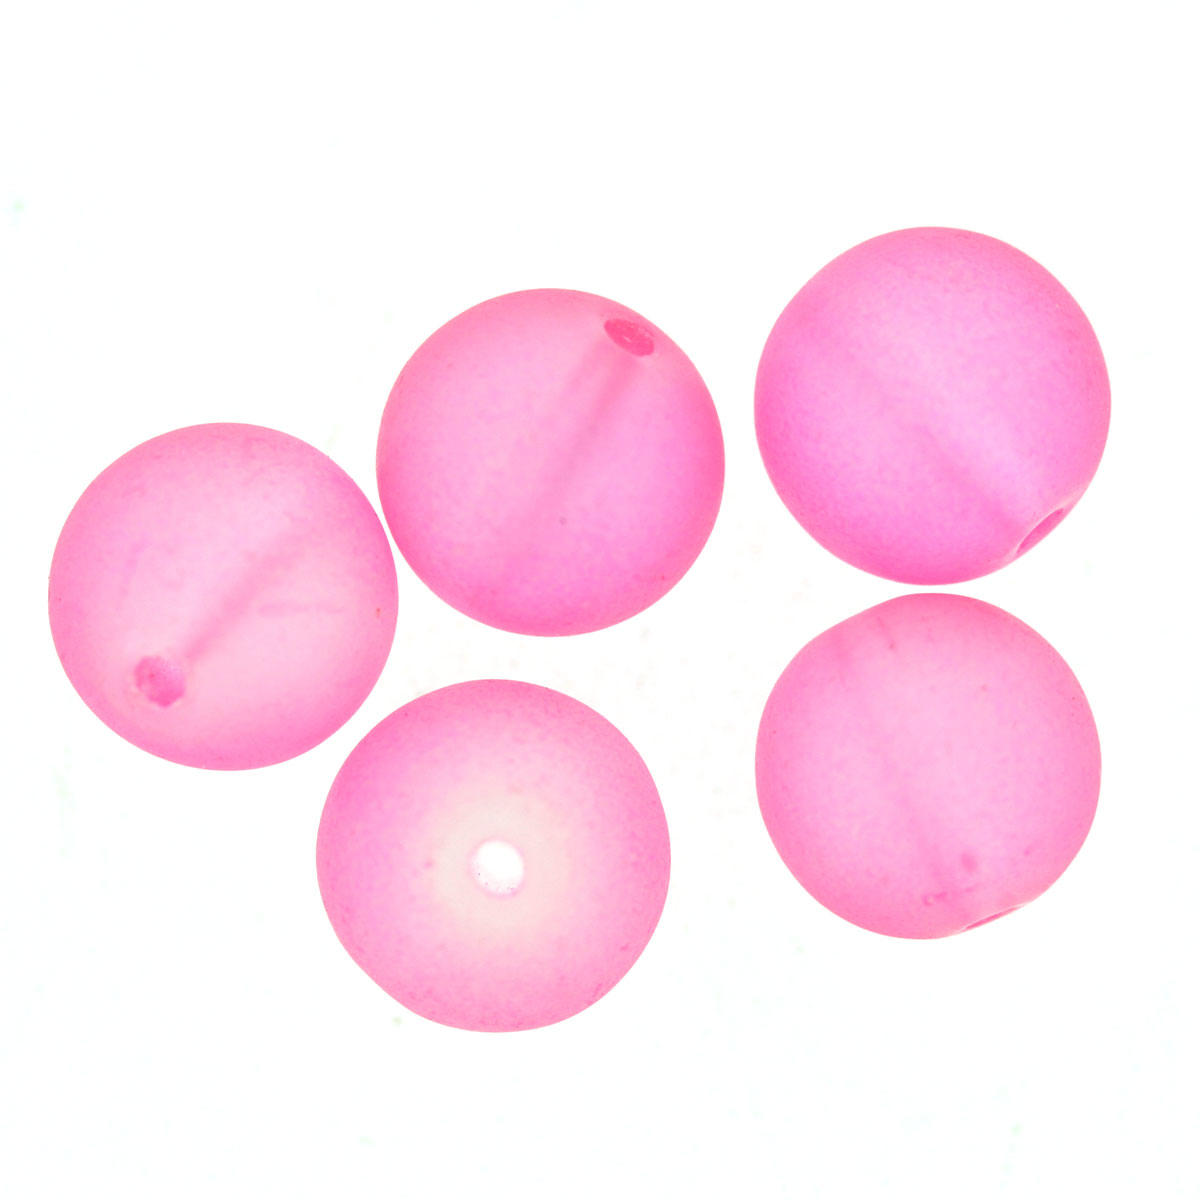 Candyfloss Frosted 12mm Glass Beads - Code 20/1012mm